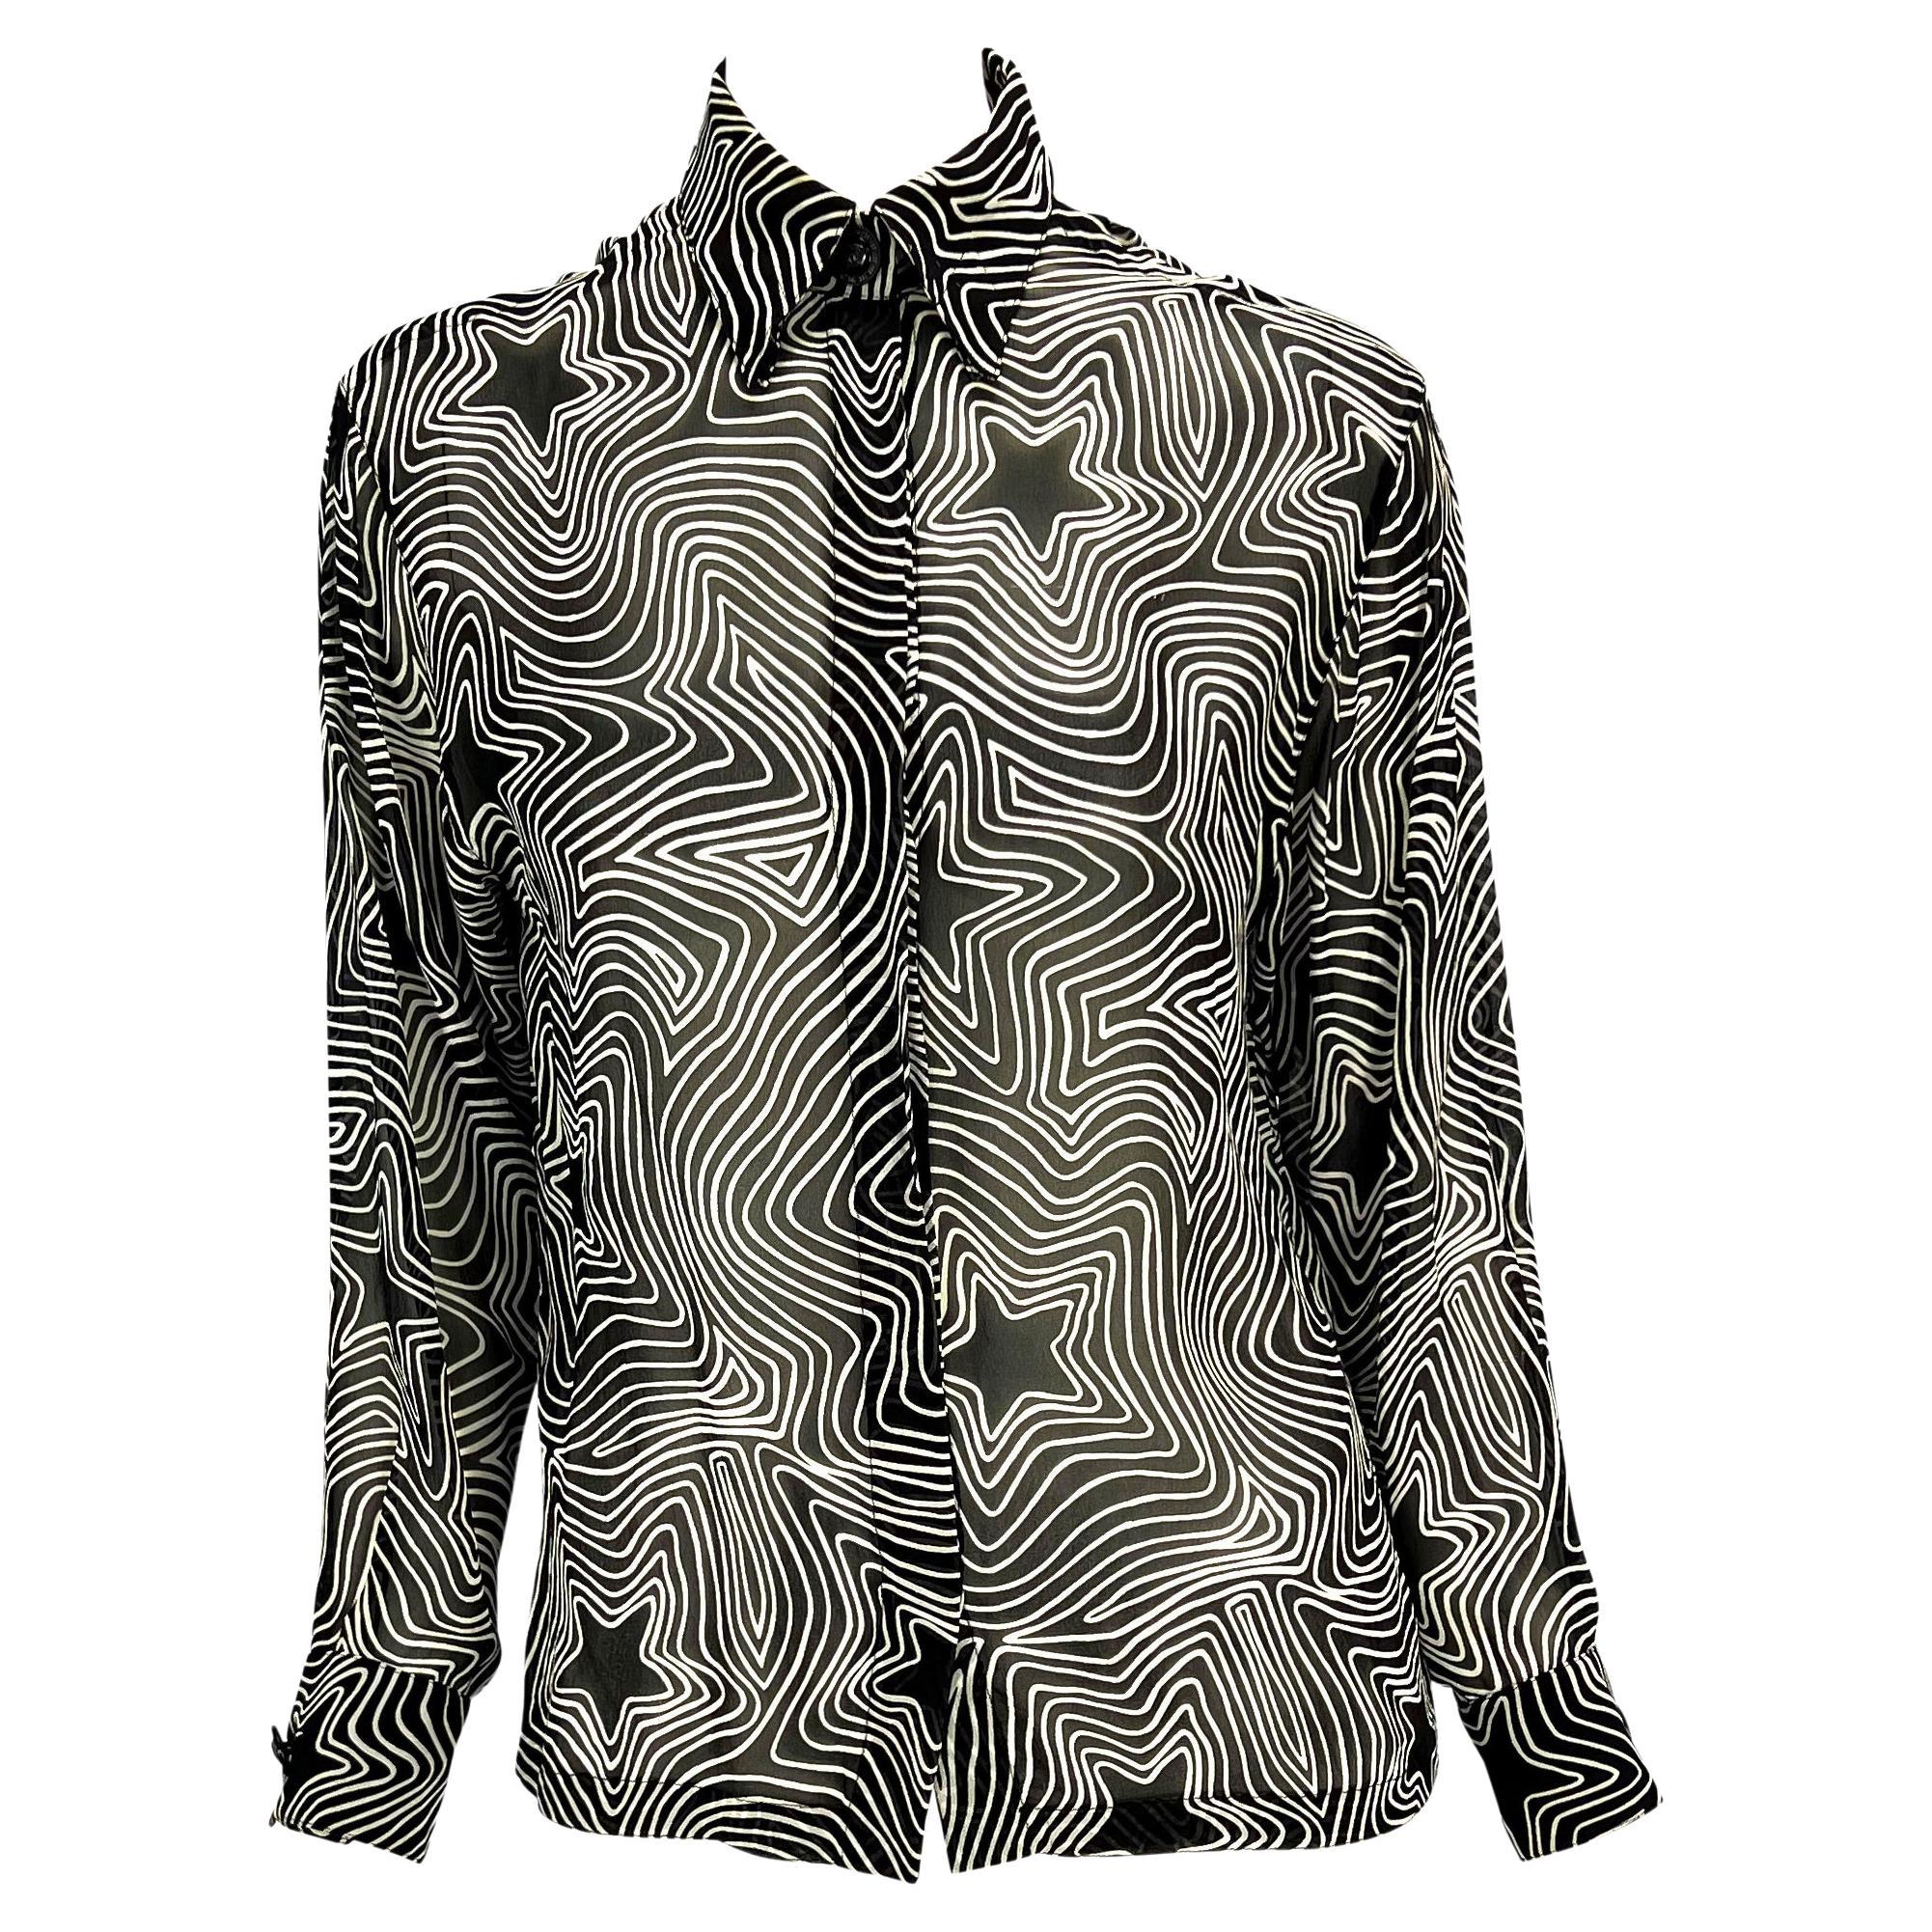 S/S 1996 Gianni Versace Couture Black & White Sheer Silk Star Print Button Top